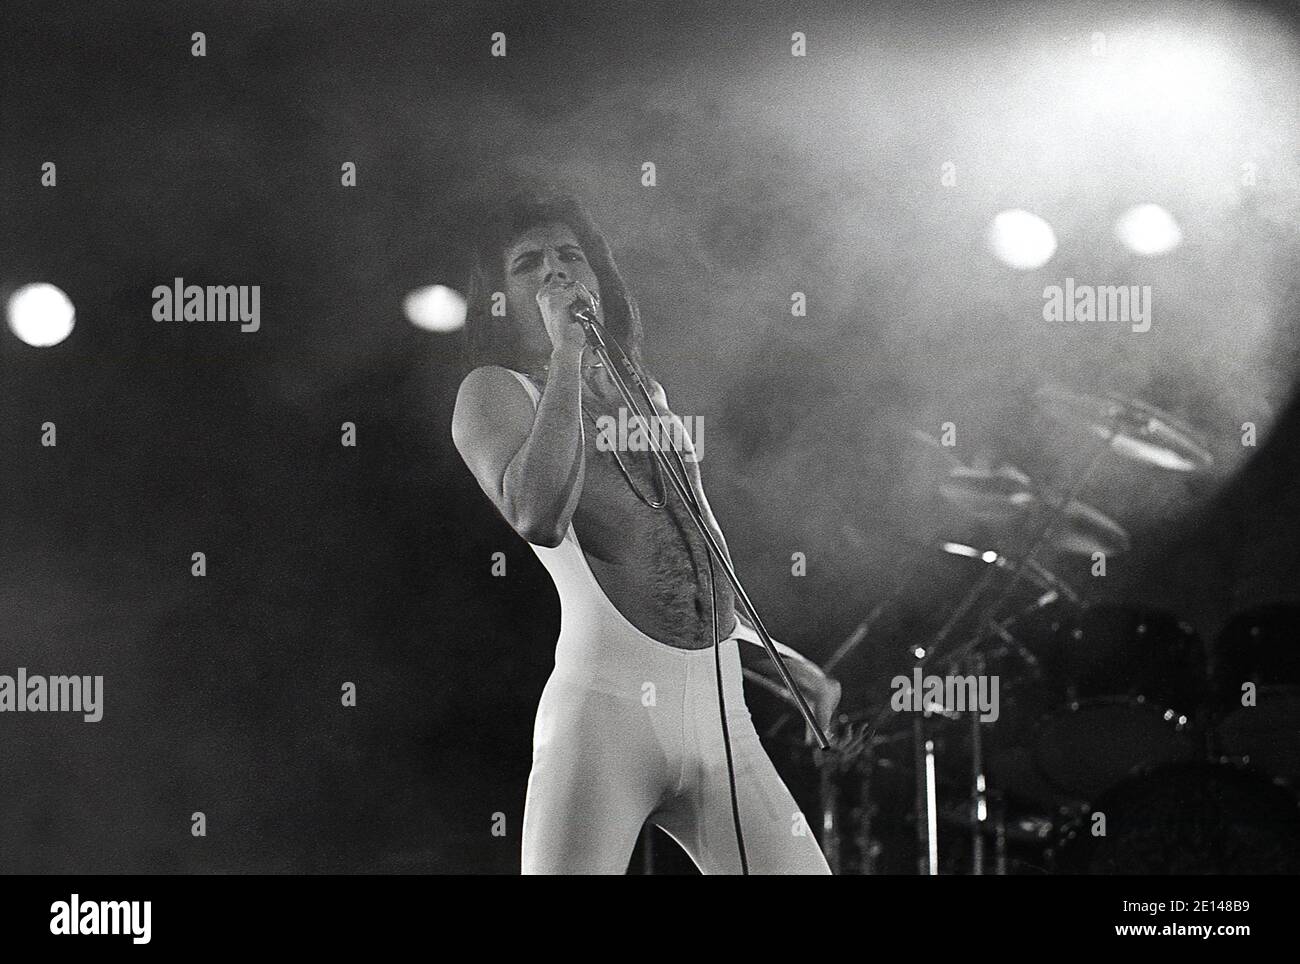 Freddie Mecury of Queen Live in Hyde Park London 18/9/1976. Free concert with 150,000 fans in the Park. Stock Photo